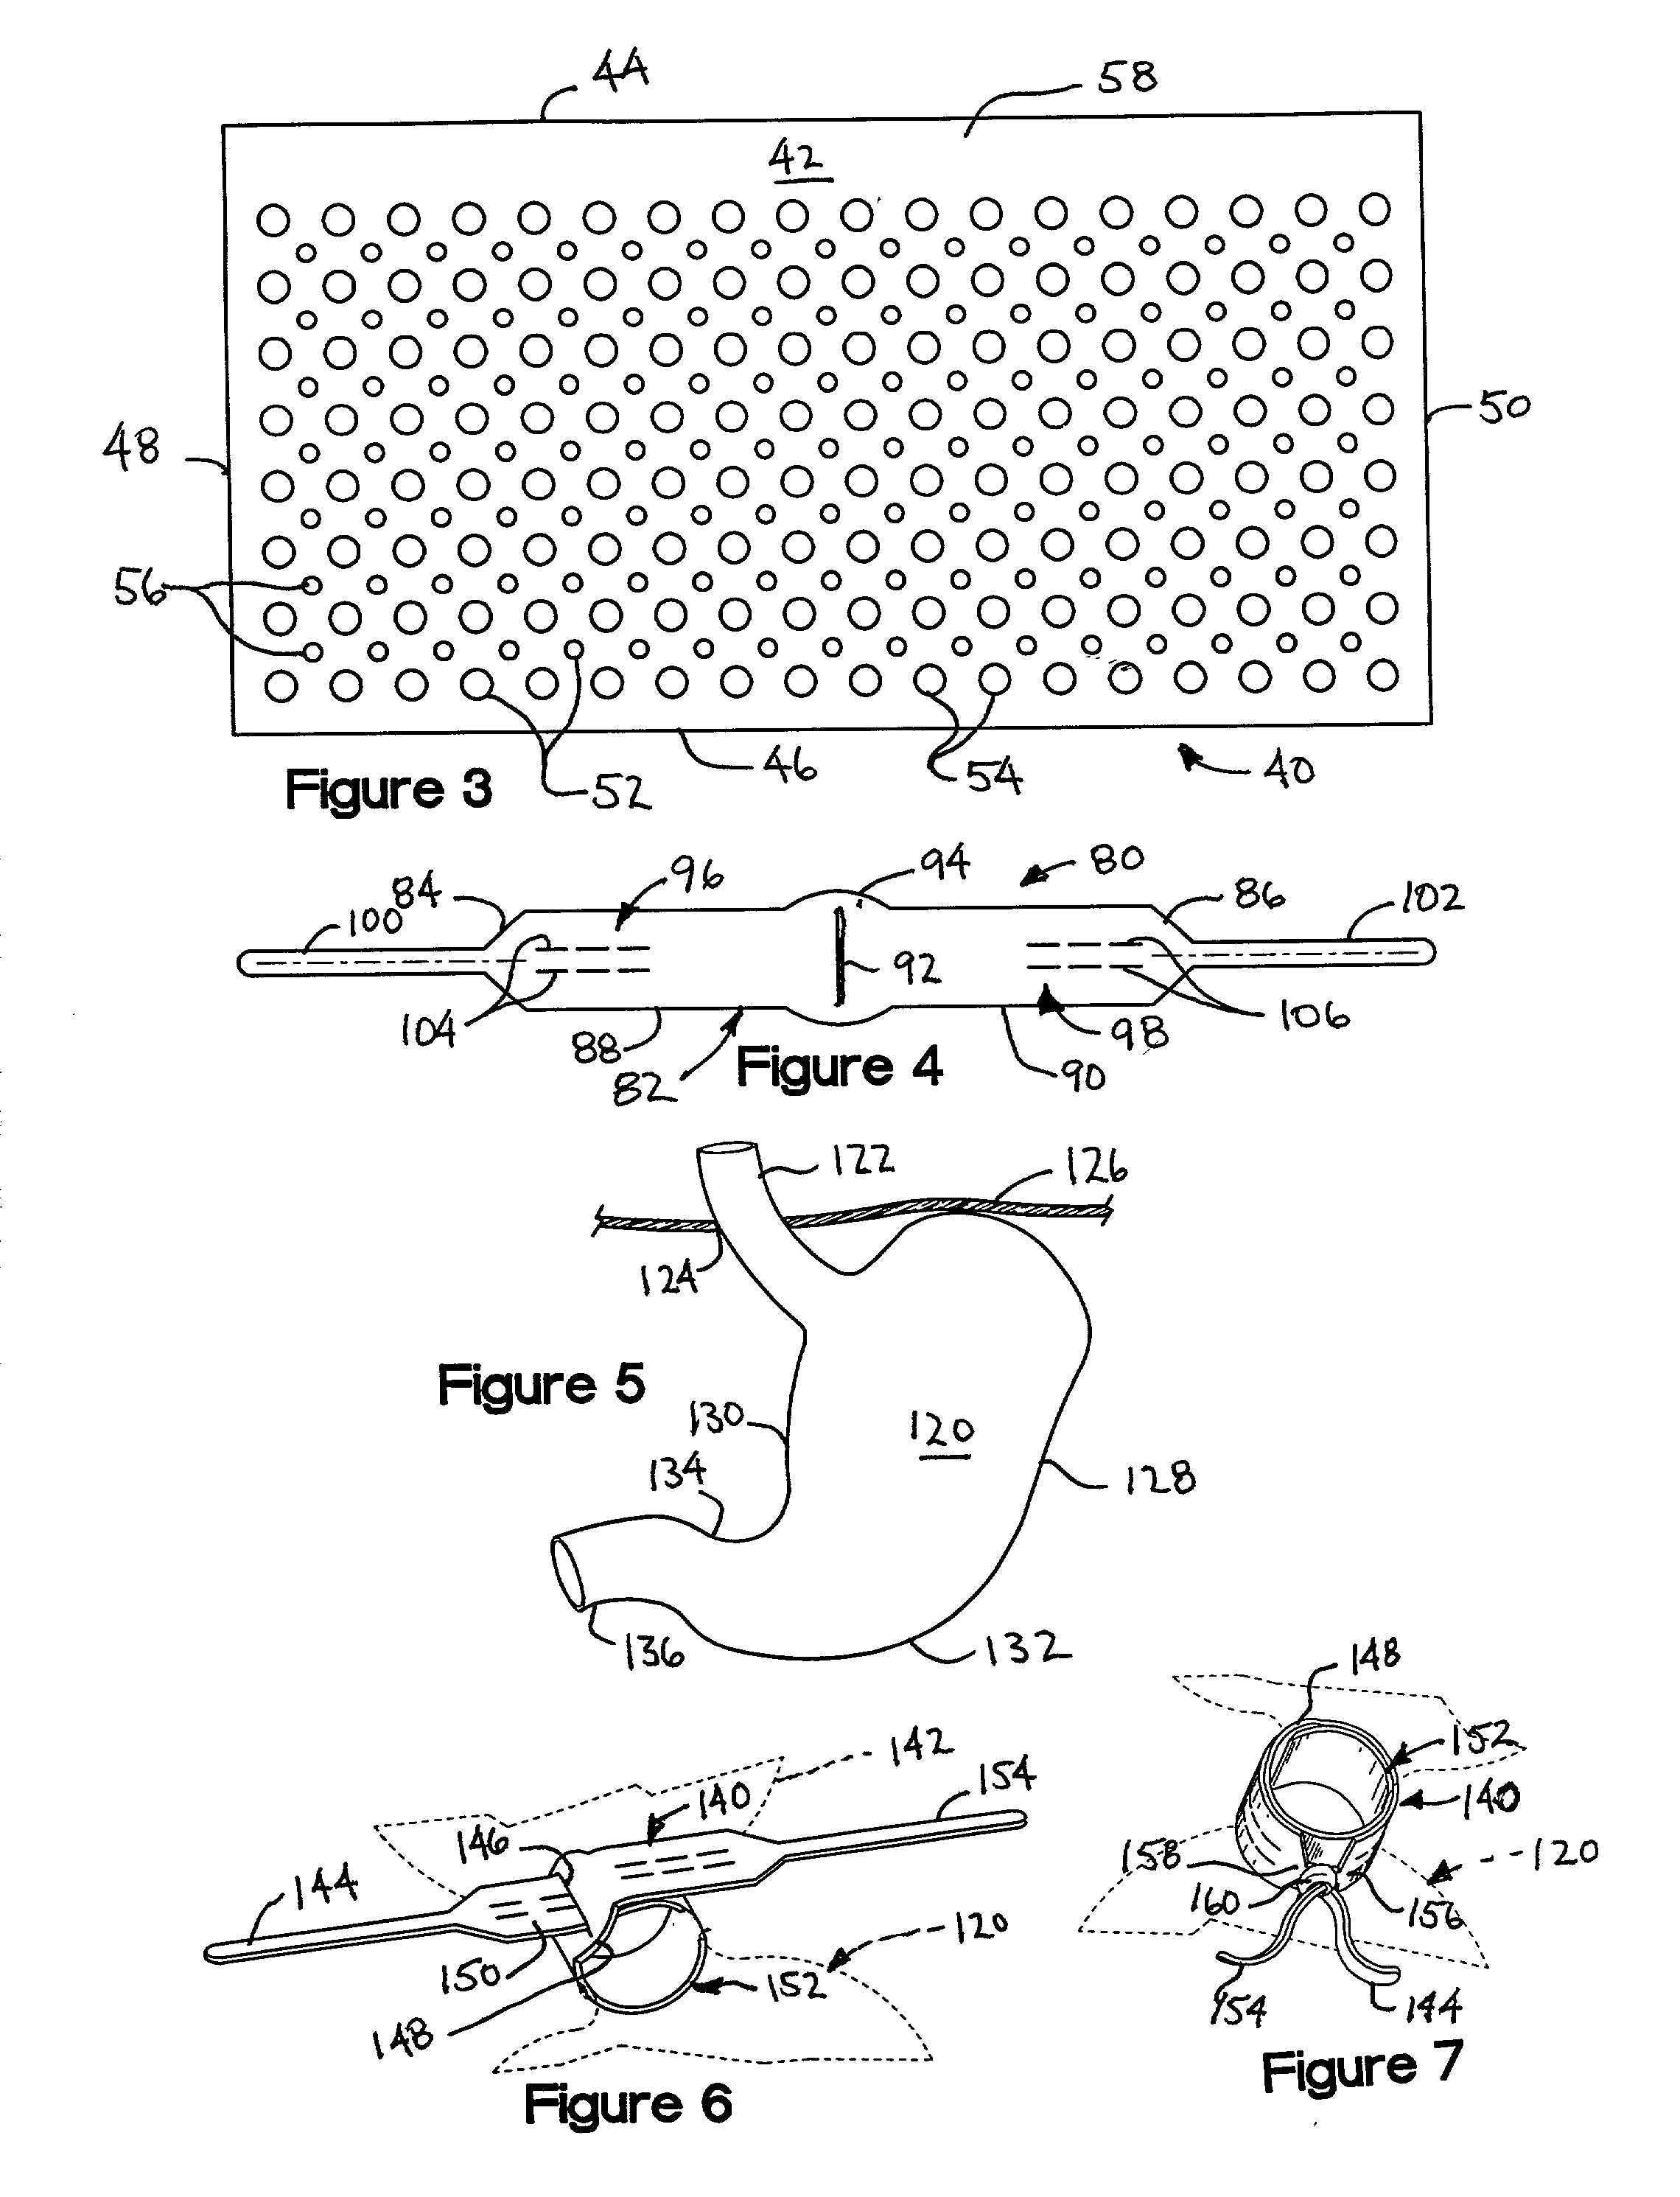 System to inhibit and/or control expansion of anatomical features